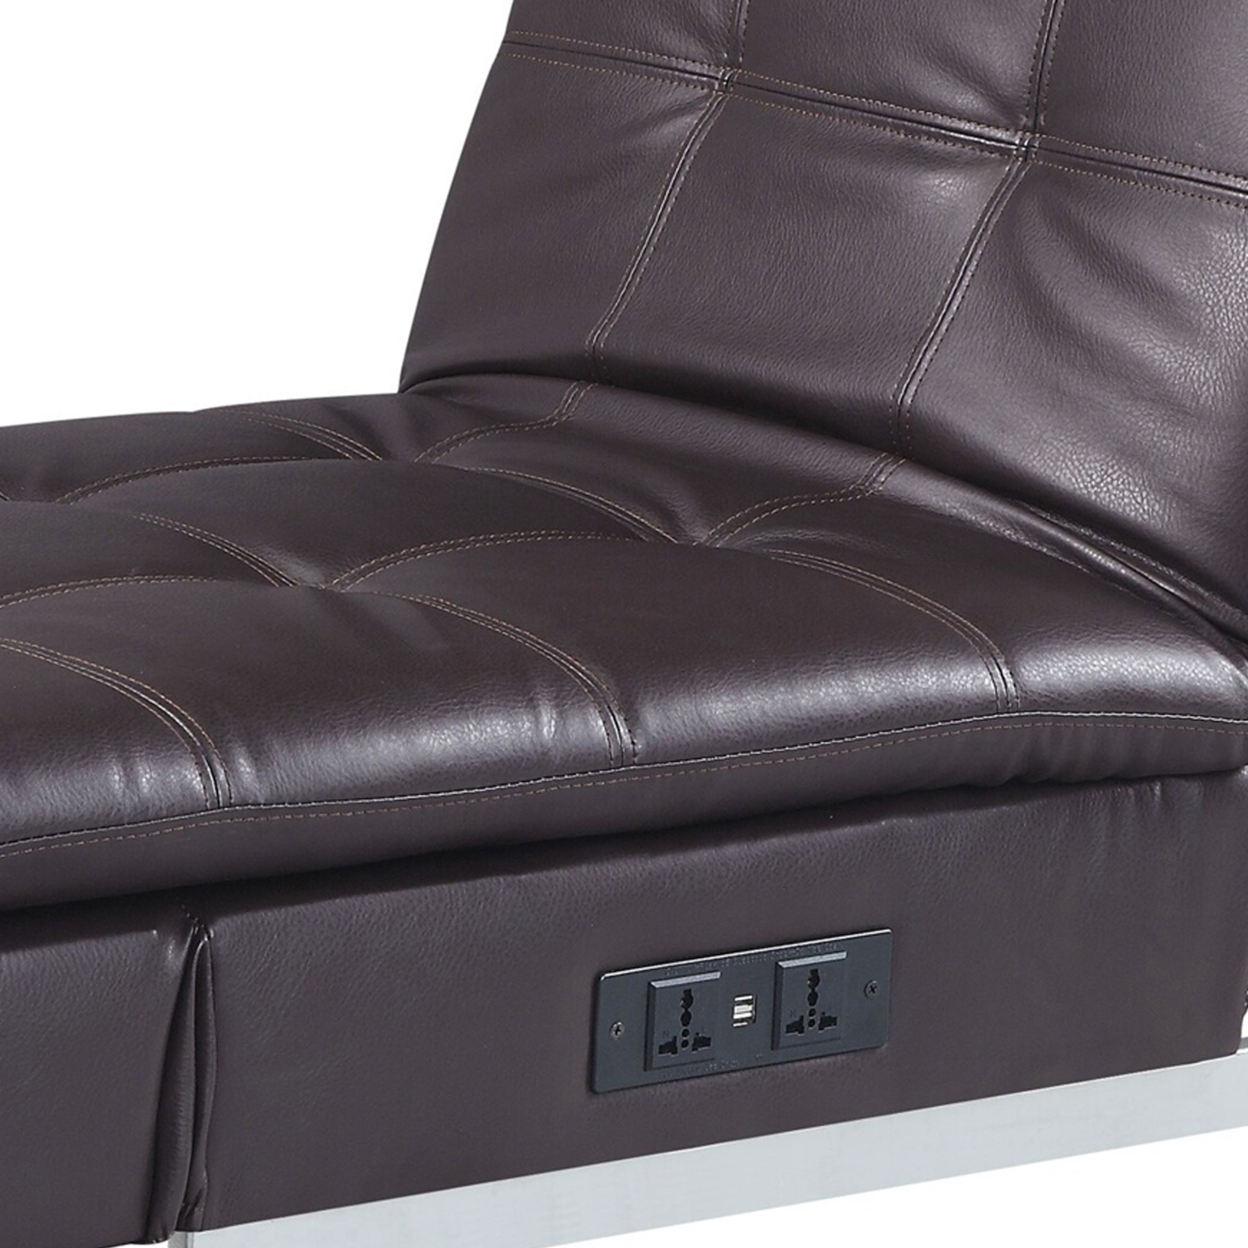 70 Inch Chaise Lounge With USB Port, Square Tufting, 1 Pillow, Black- Saltoro Sherpi